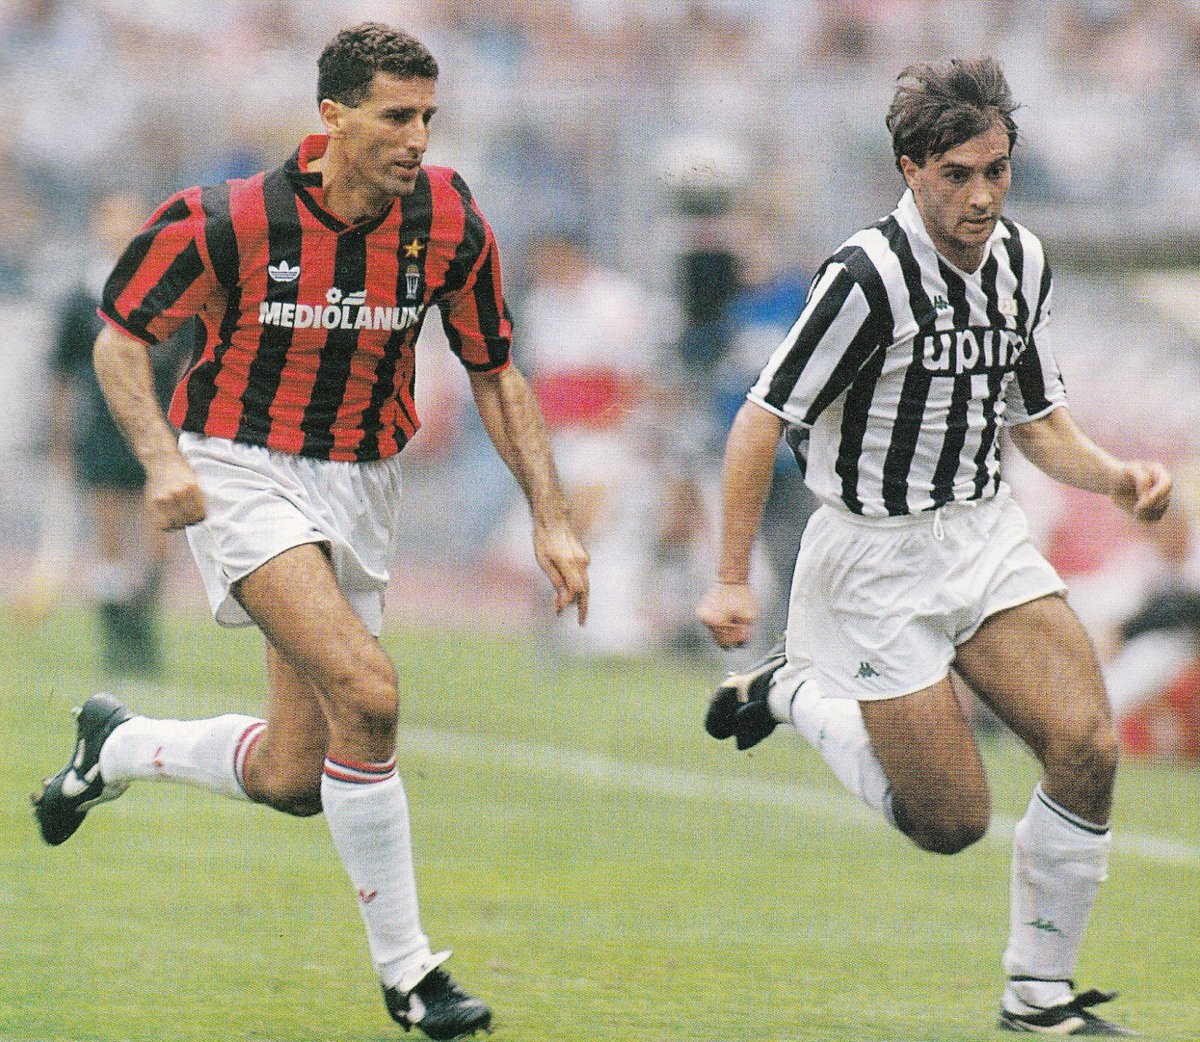 Day 23. This is a treat. It pre-dates Gazzetta. Sky Sports and Martin Tyler this time with coverage of Milan v Juventus from 1991/92. There are more of these to come. 